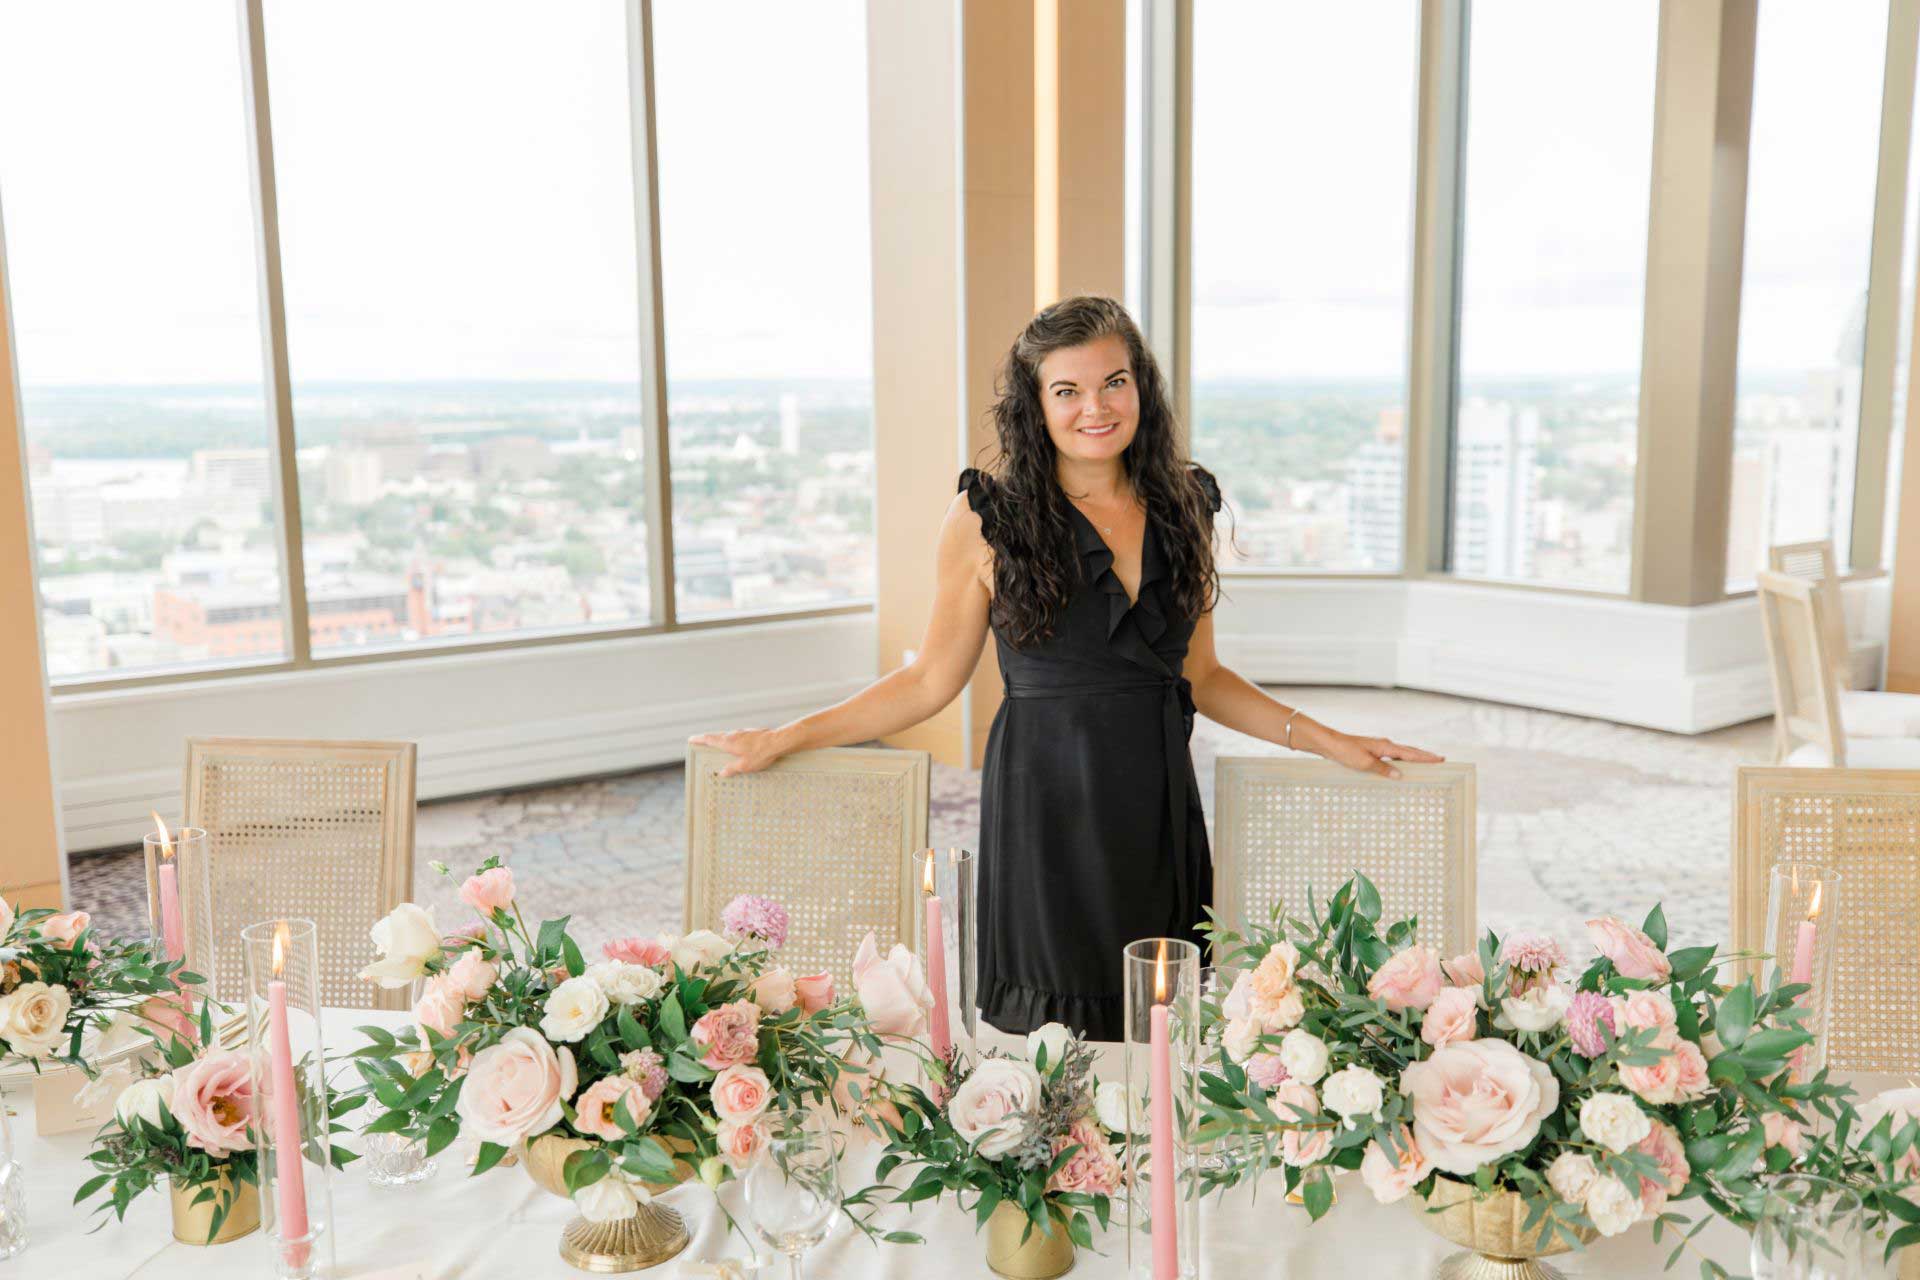 Erica Irwin Weddings and Events | About Erica